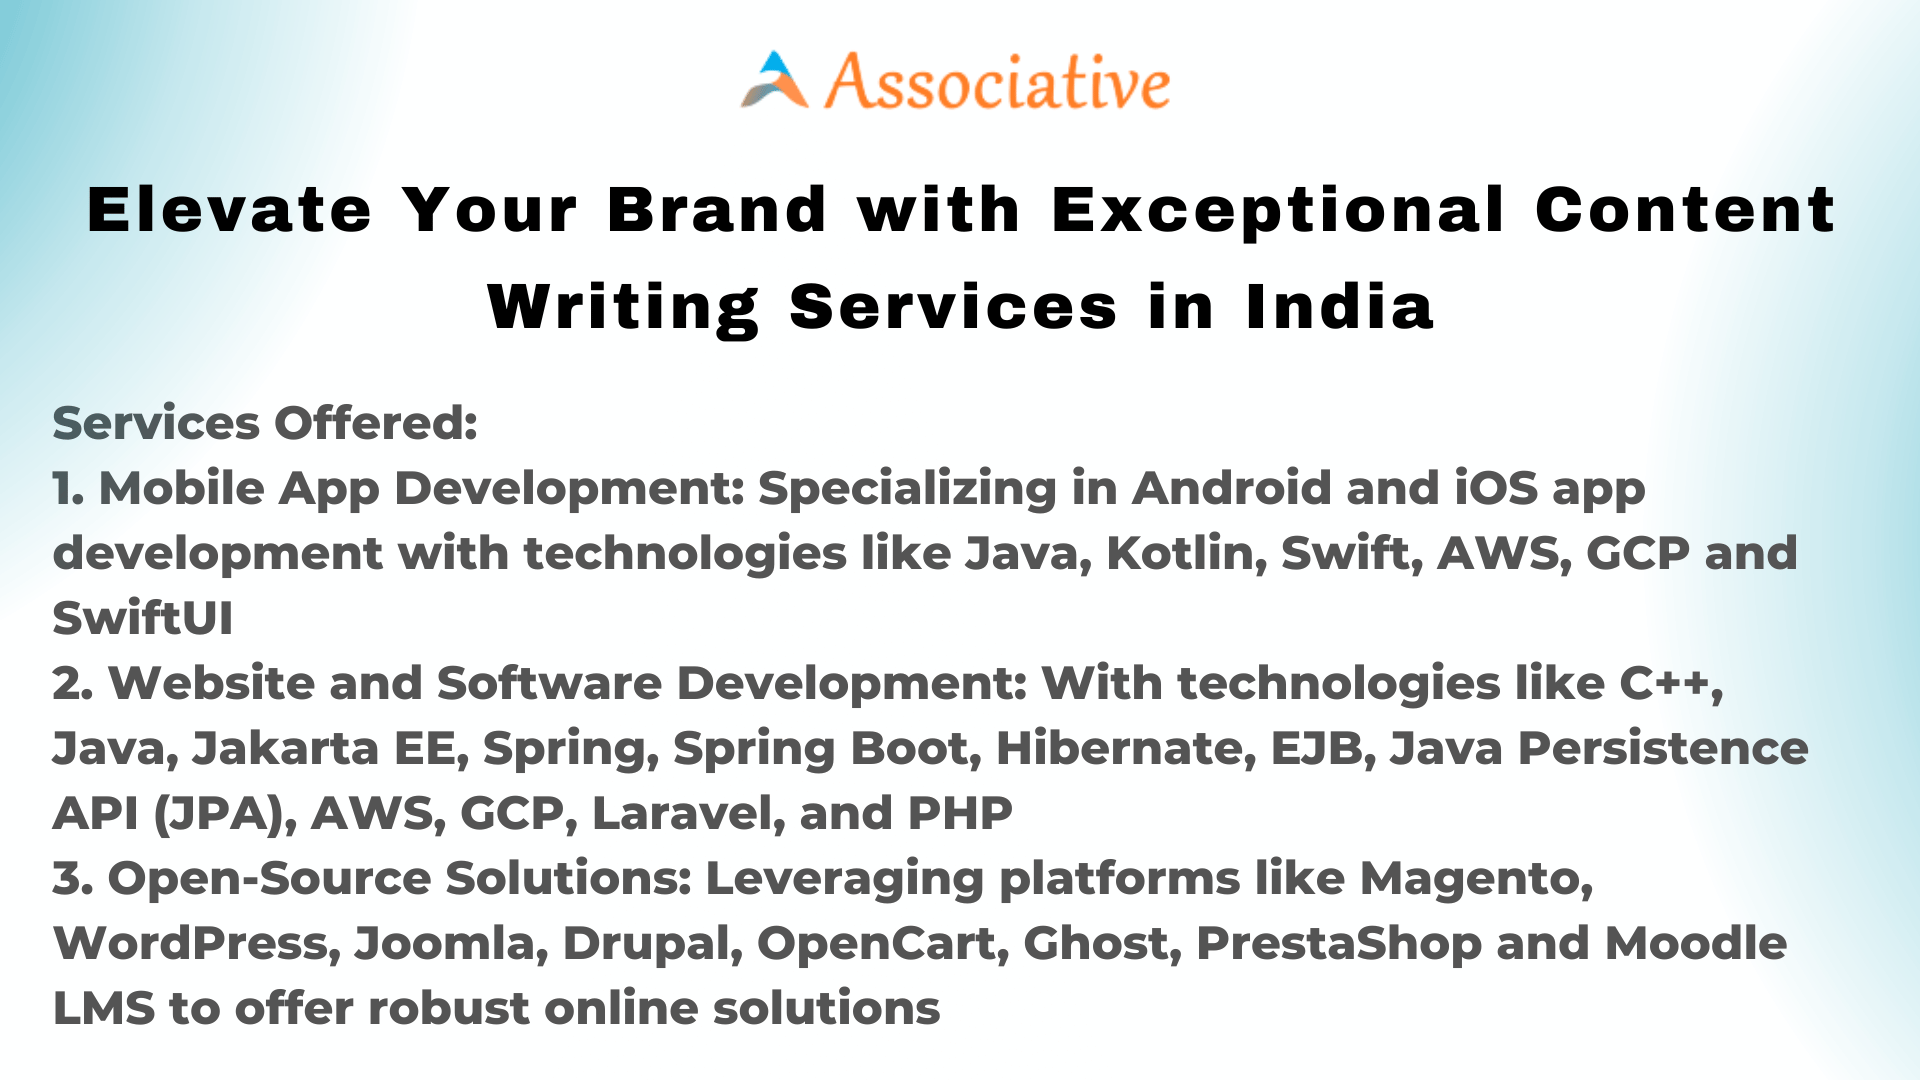 Elevate Your Brand with Exceptional Content Writing Services in India